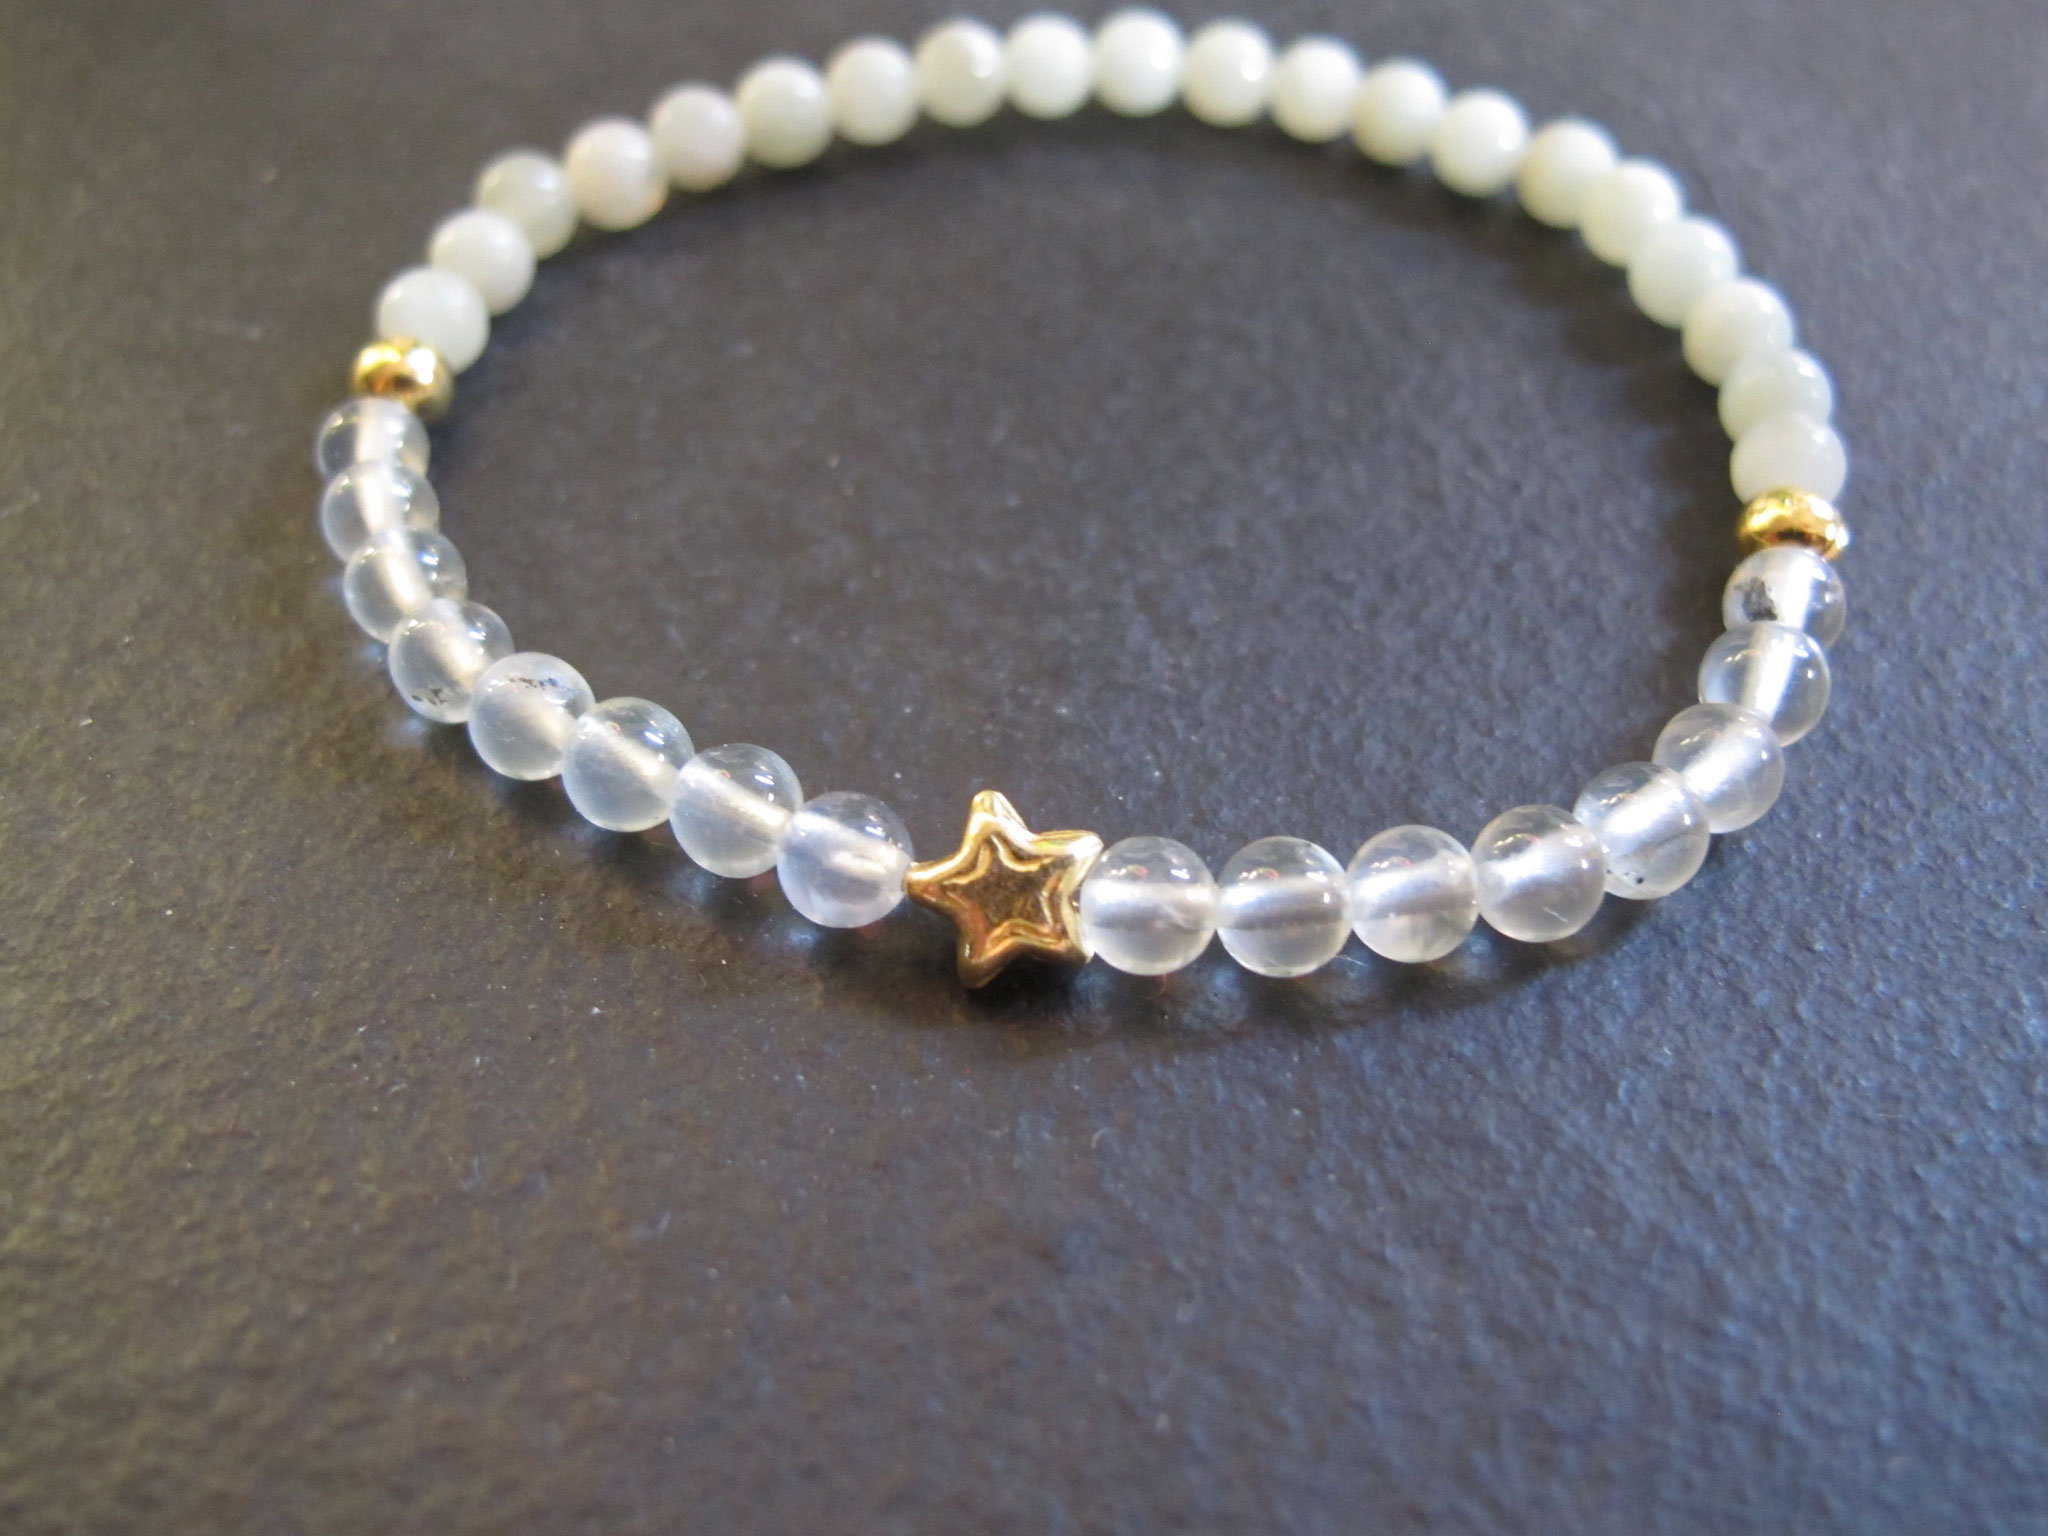 Prehnite in combination with lovely chinese jade, finished off with a gold-plated star and elements